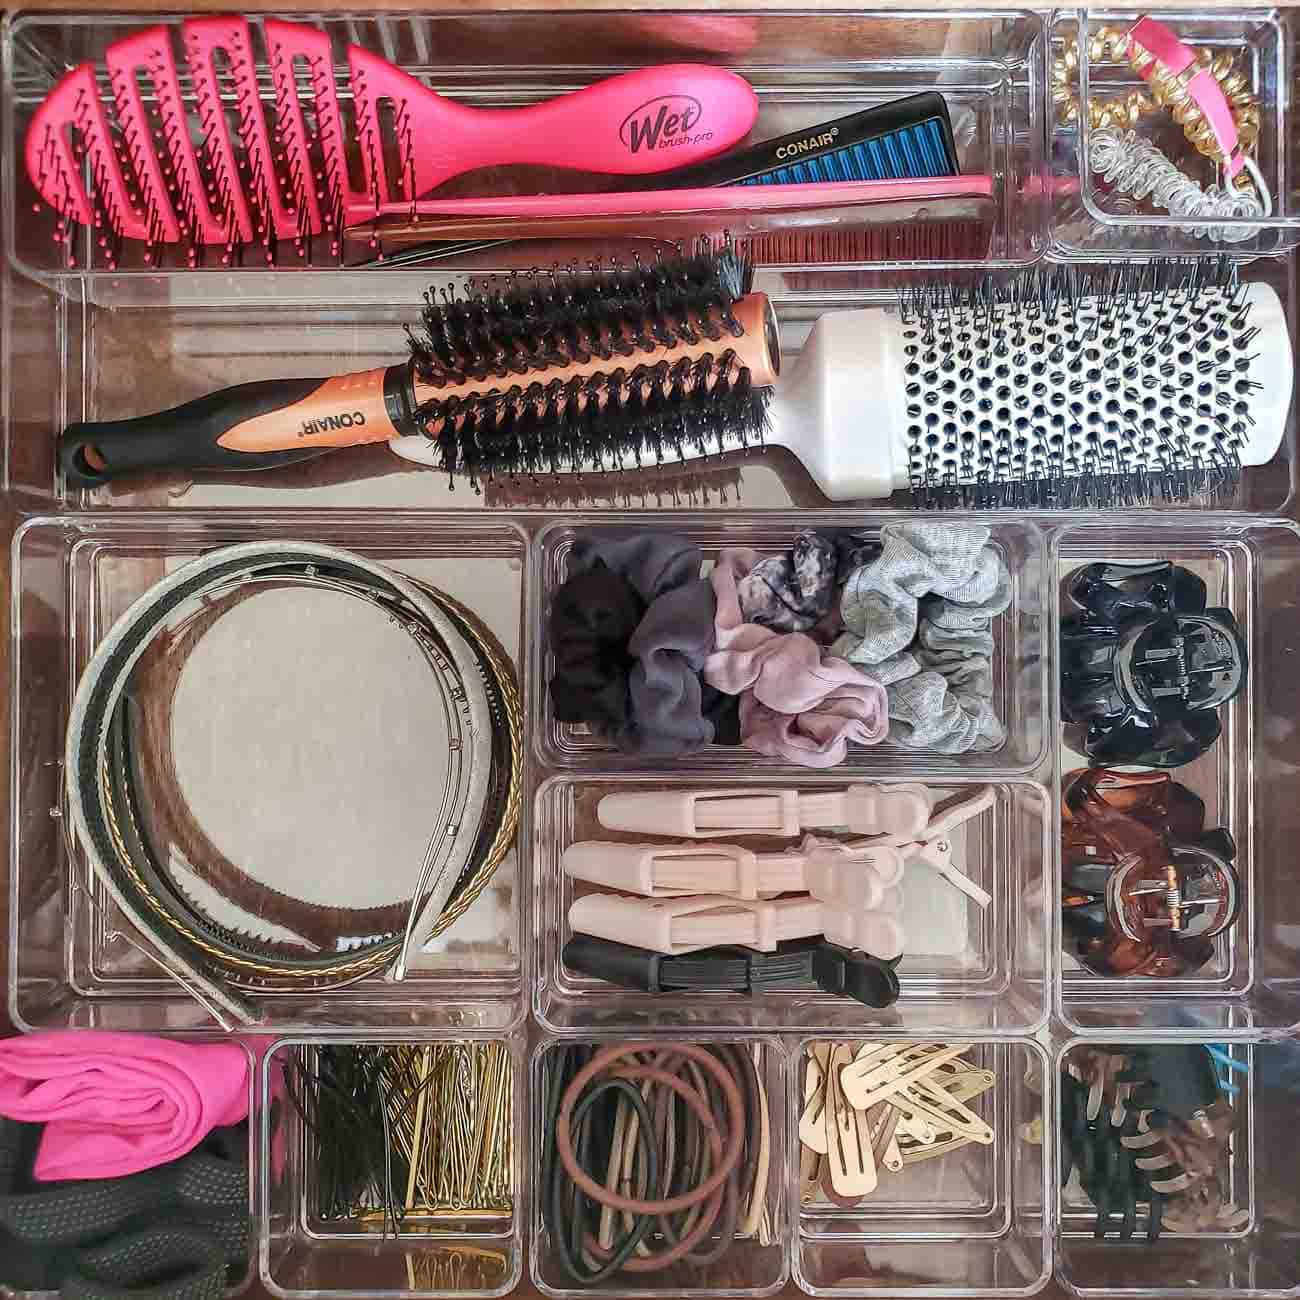 Bathroom drawer organization - hair supplies in clear containers